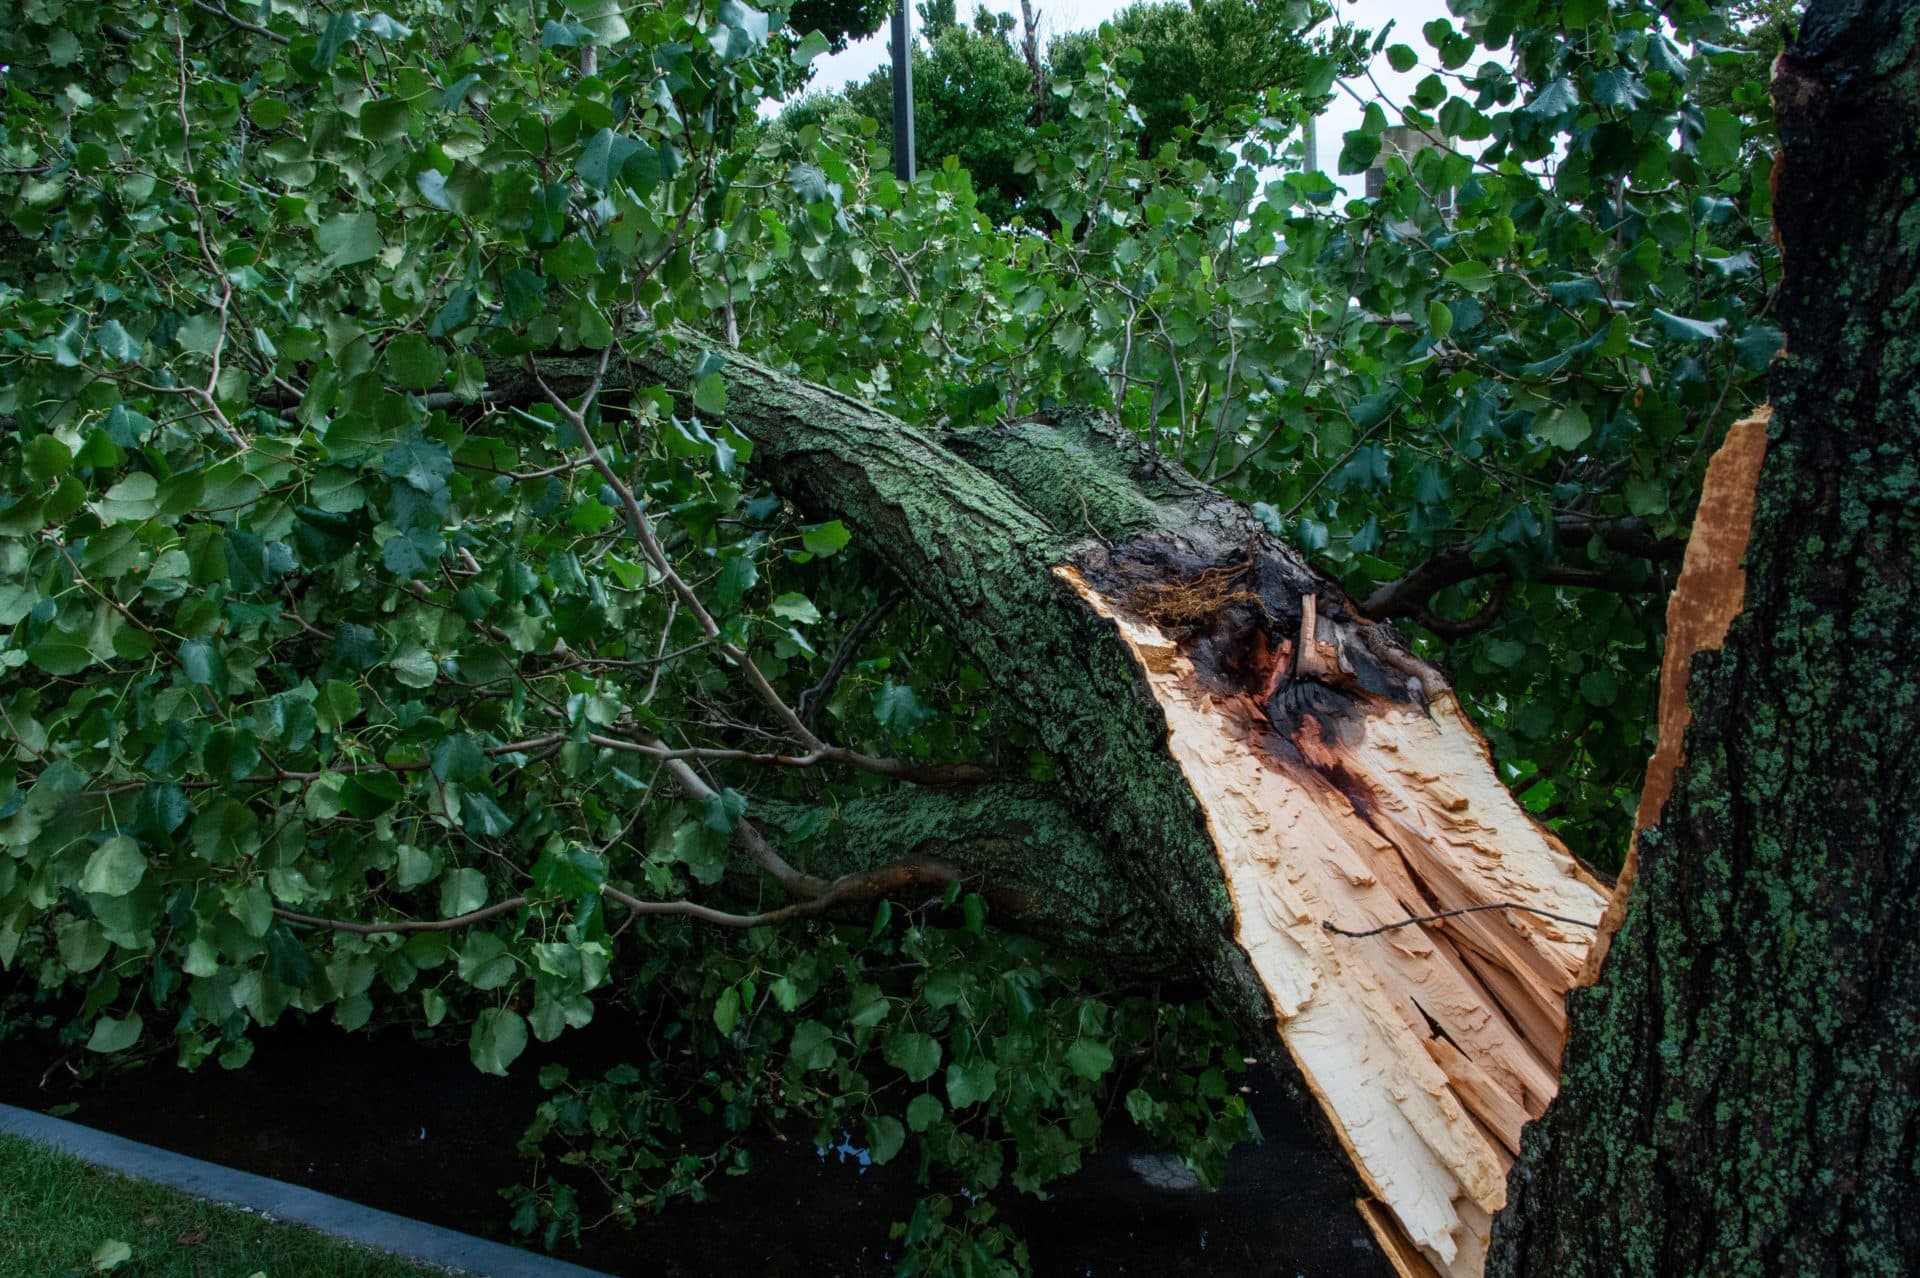 A tree branch is ripped apart during Tropical Storm Henri in New London, Connecticut (Joseph Prezioso/AFP via Getty Images)